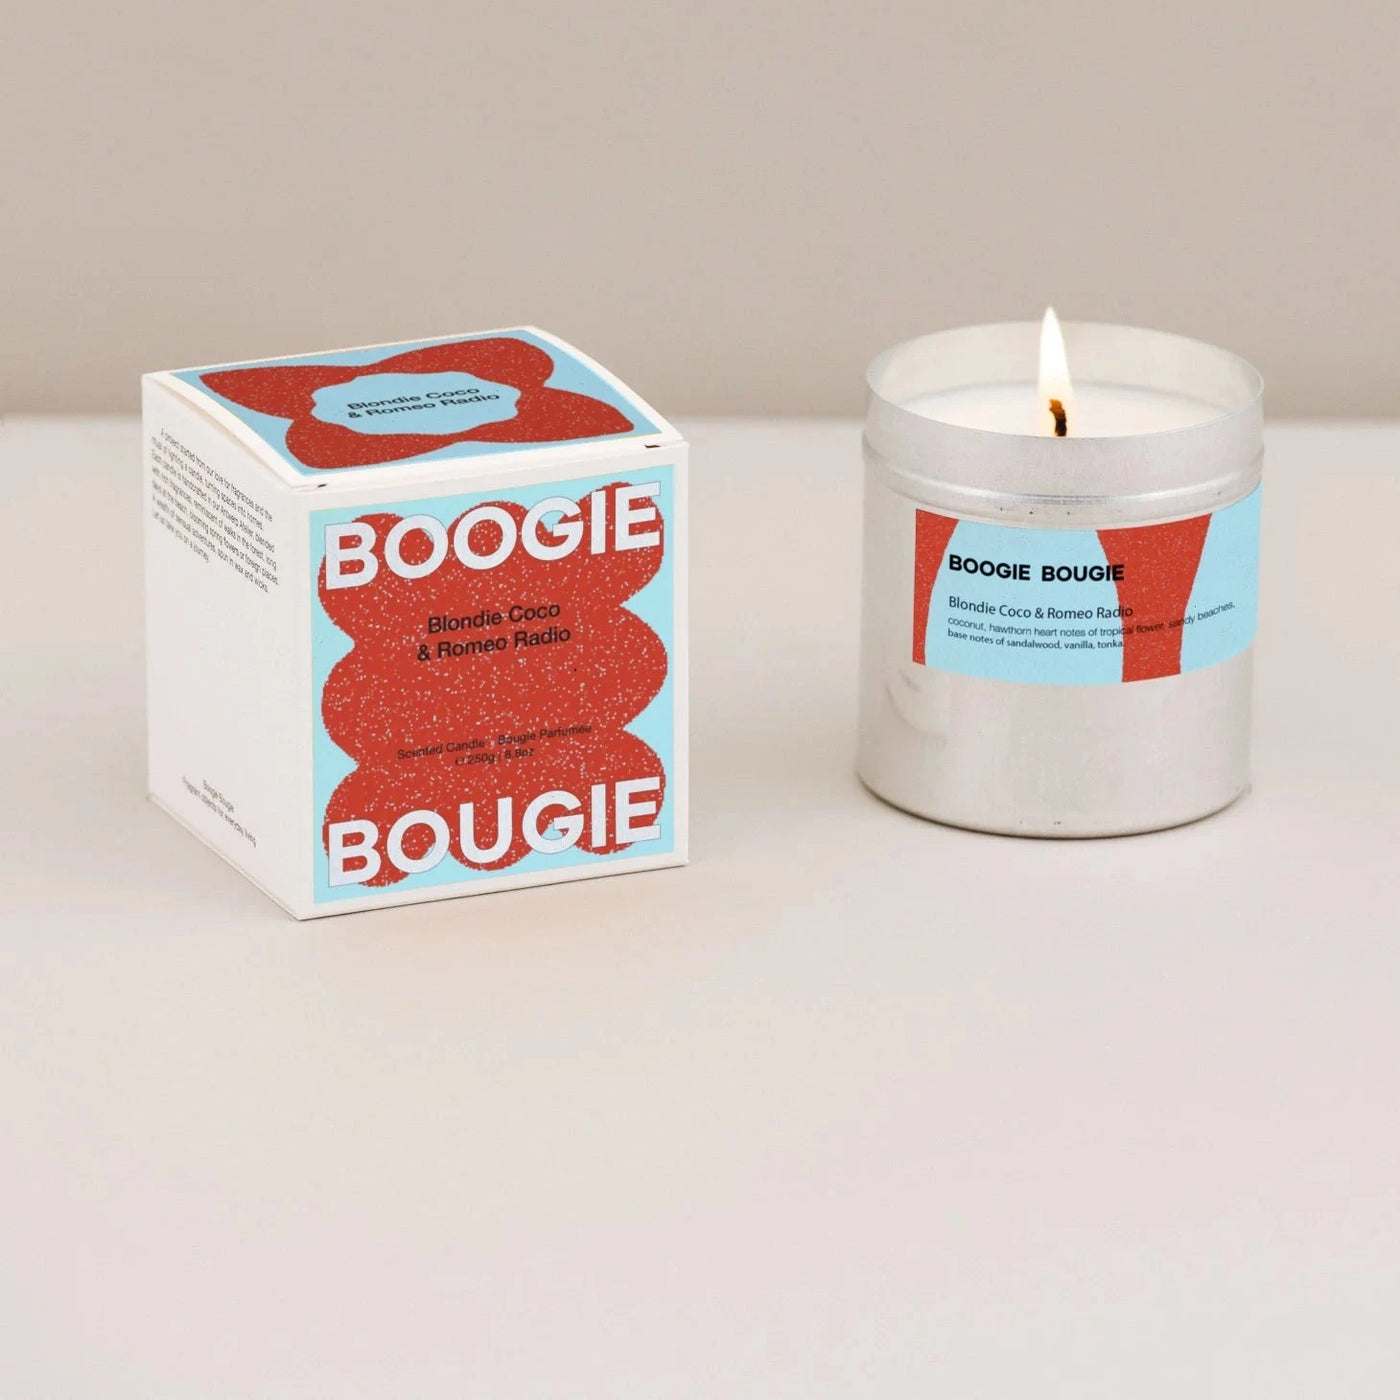 LIMITED SUMMER EDITION // Scented candle Blondie coco & romeo radio